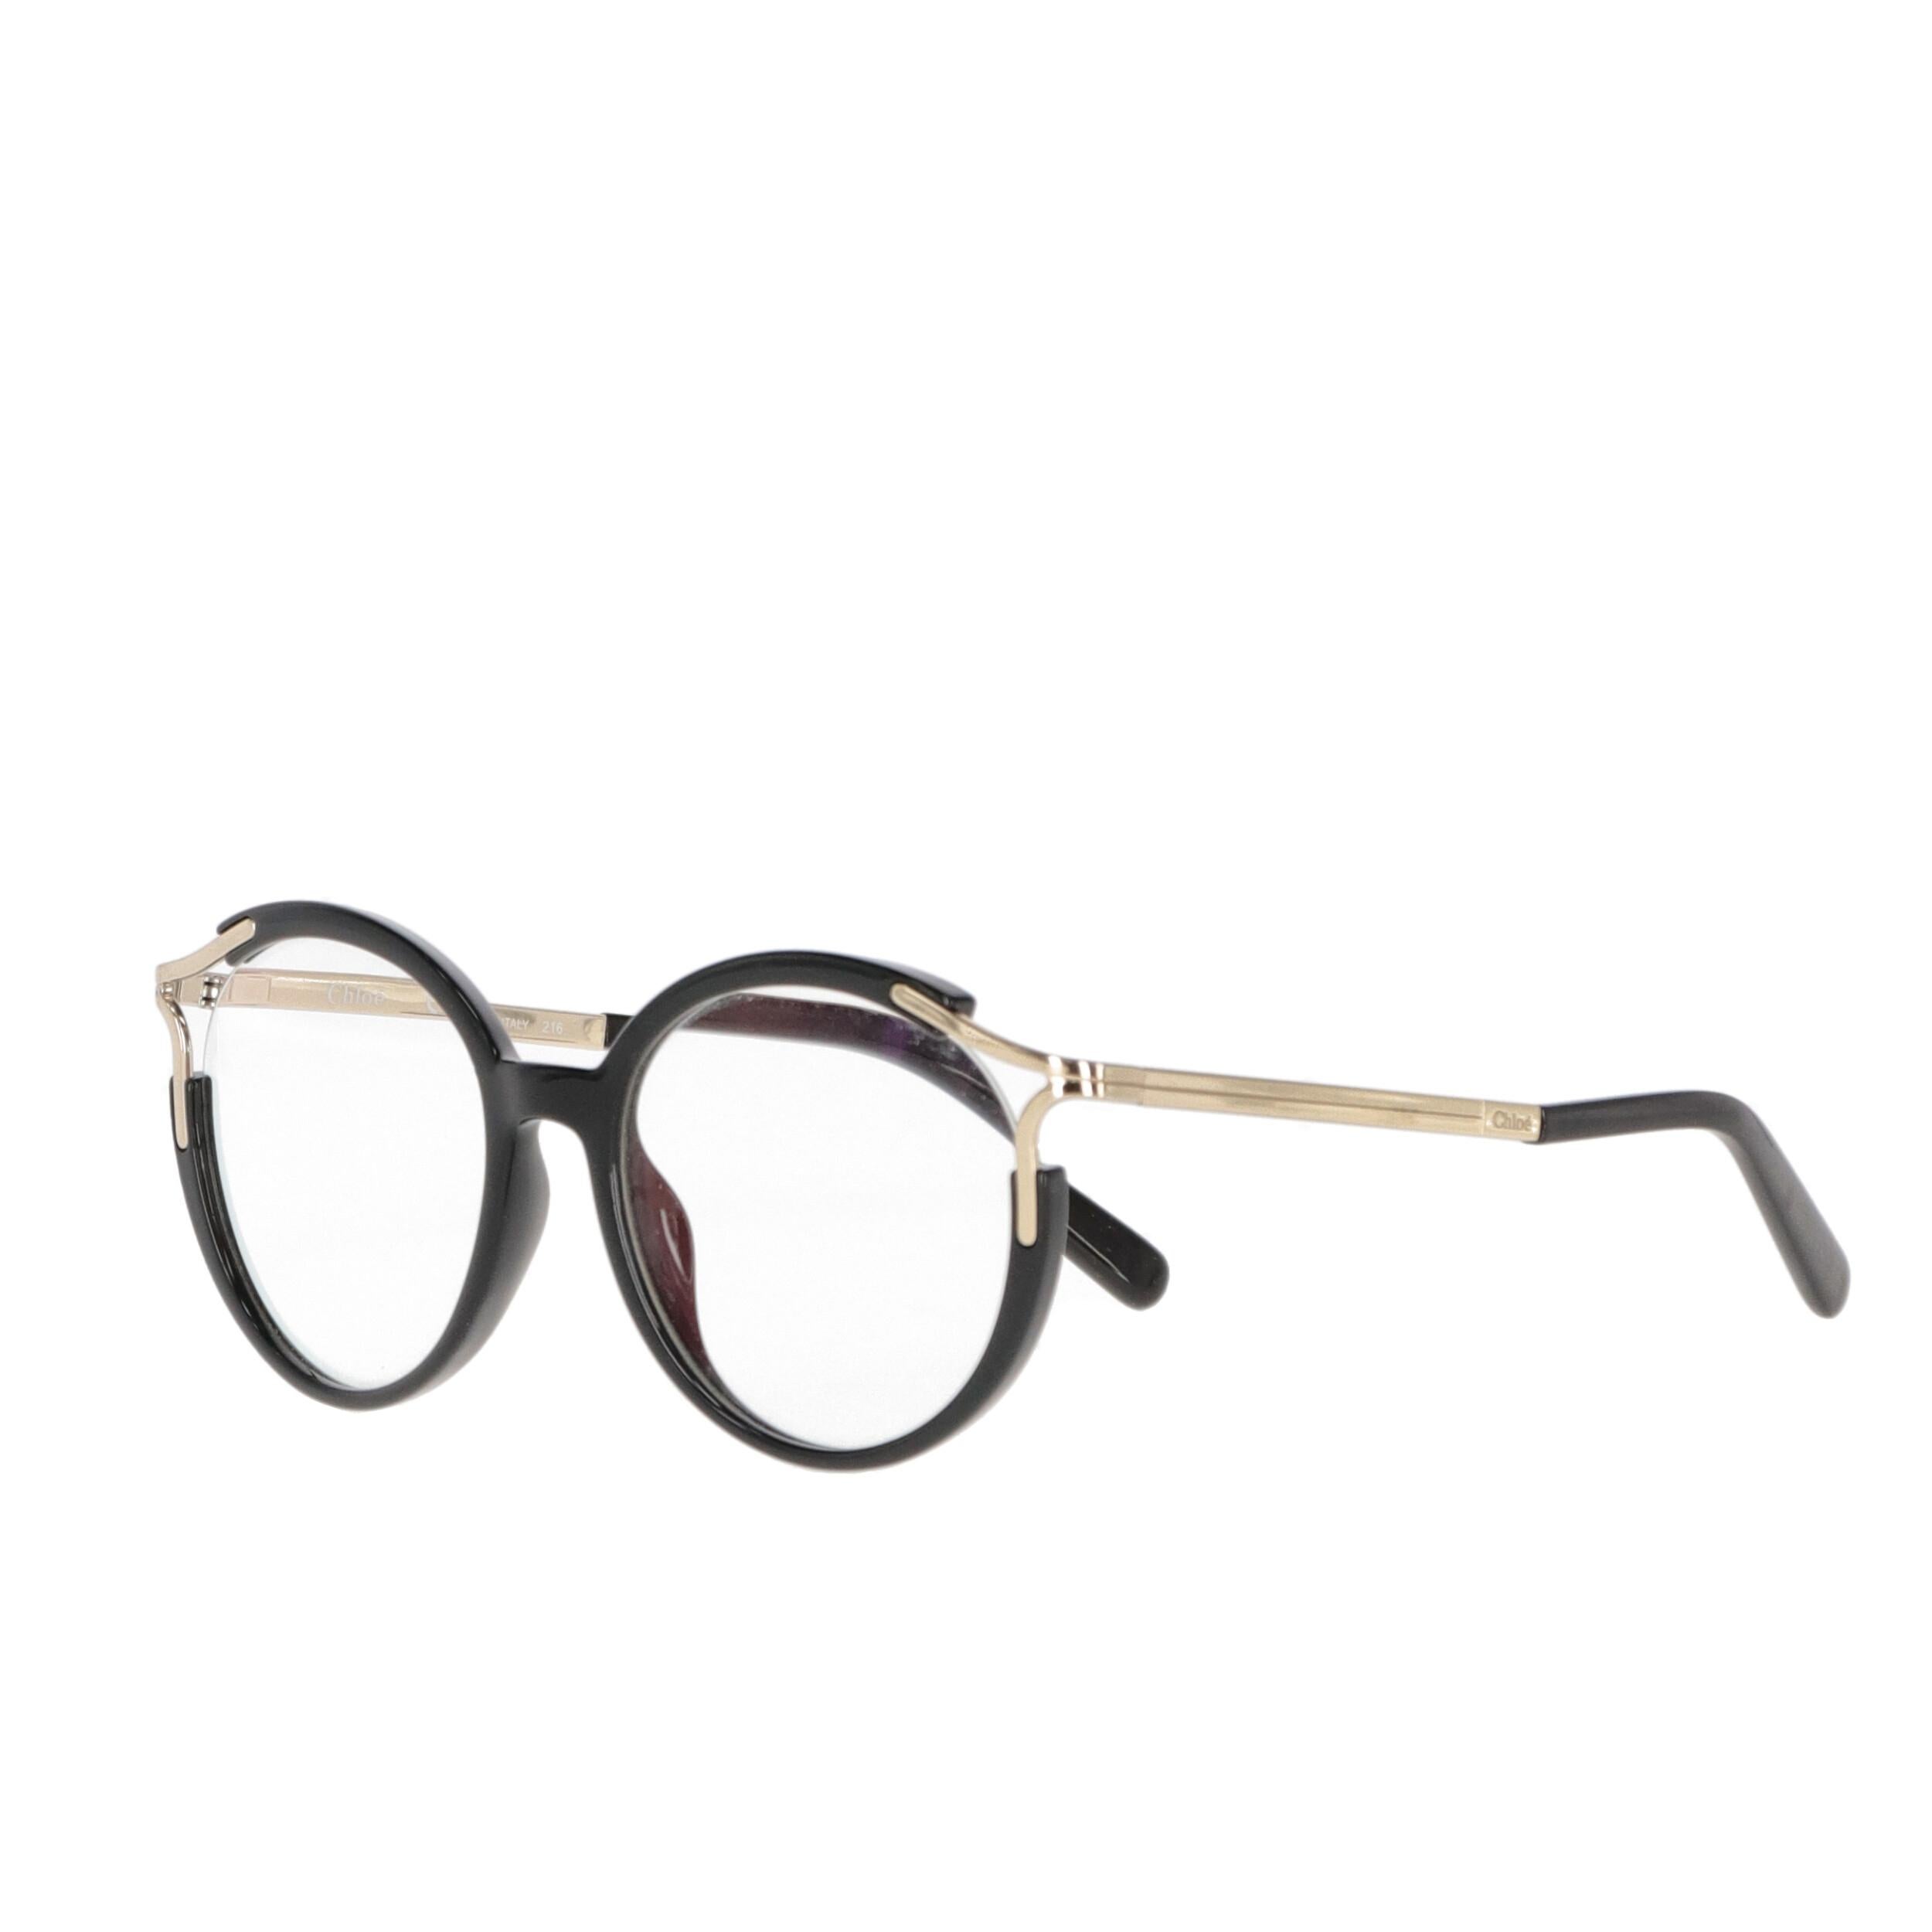 Chloé black acetate glasses with golden metal details.

The product shows some small scratches on the stems.

The lenses must be replaced.

Please note, this item cannot be shipped to the US.
Made in Italy

Years: 1990s

Width: 14 cm
Height: 5 cm